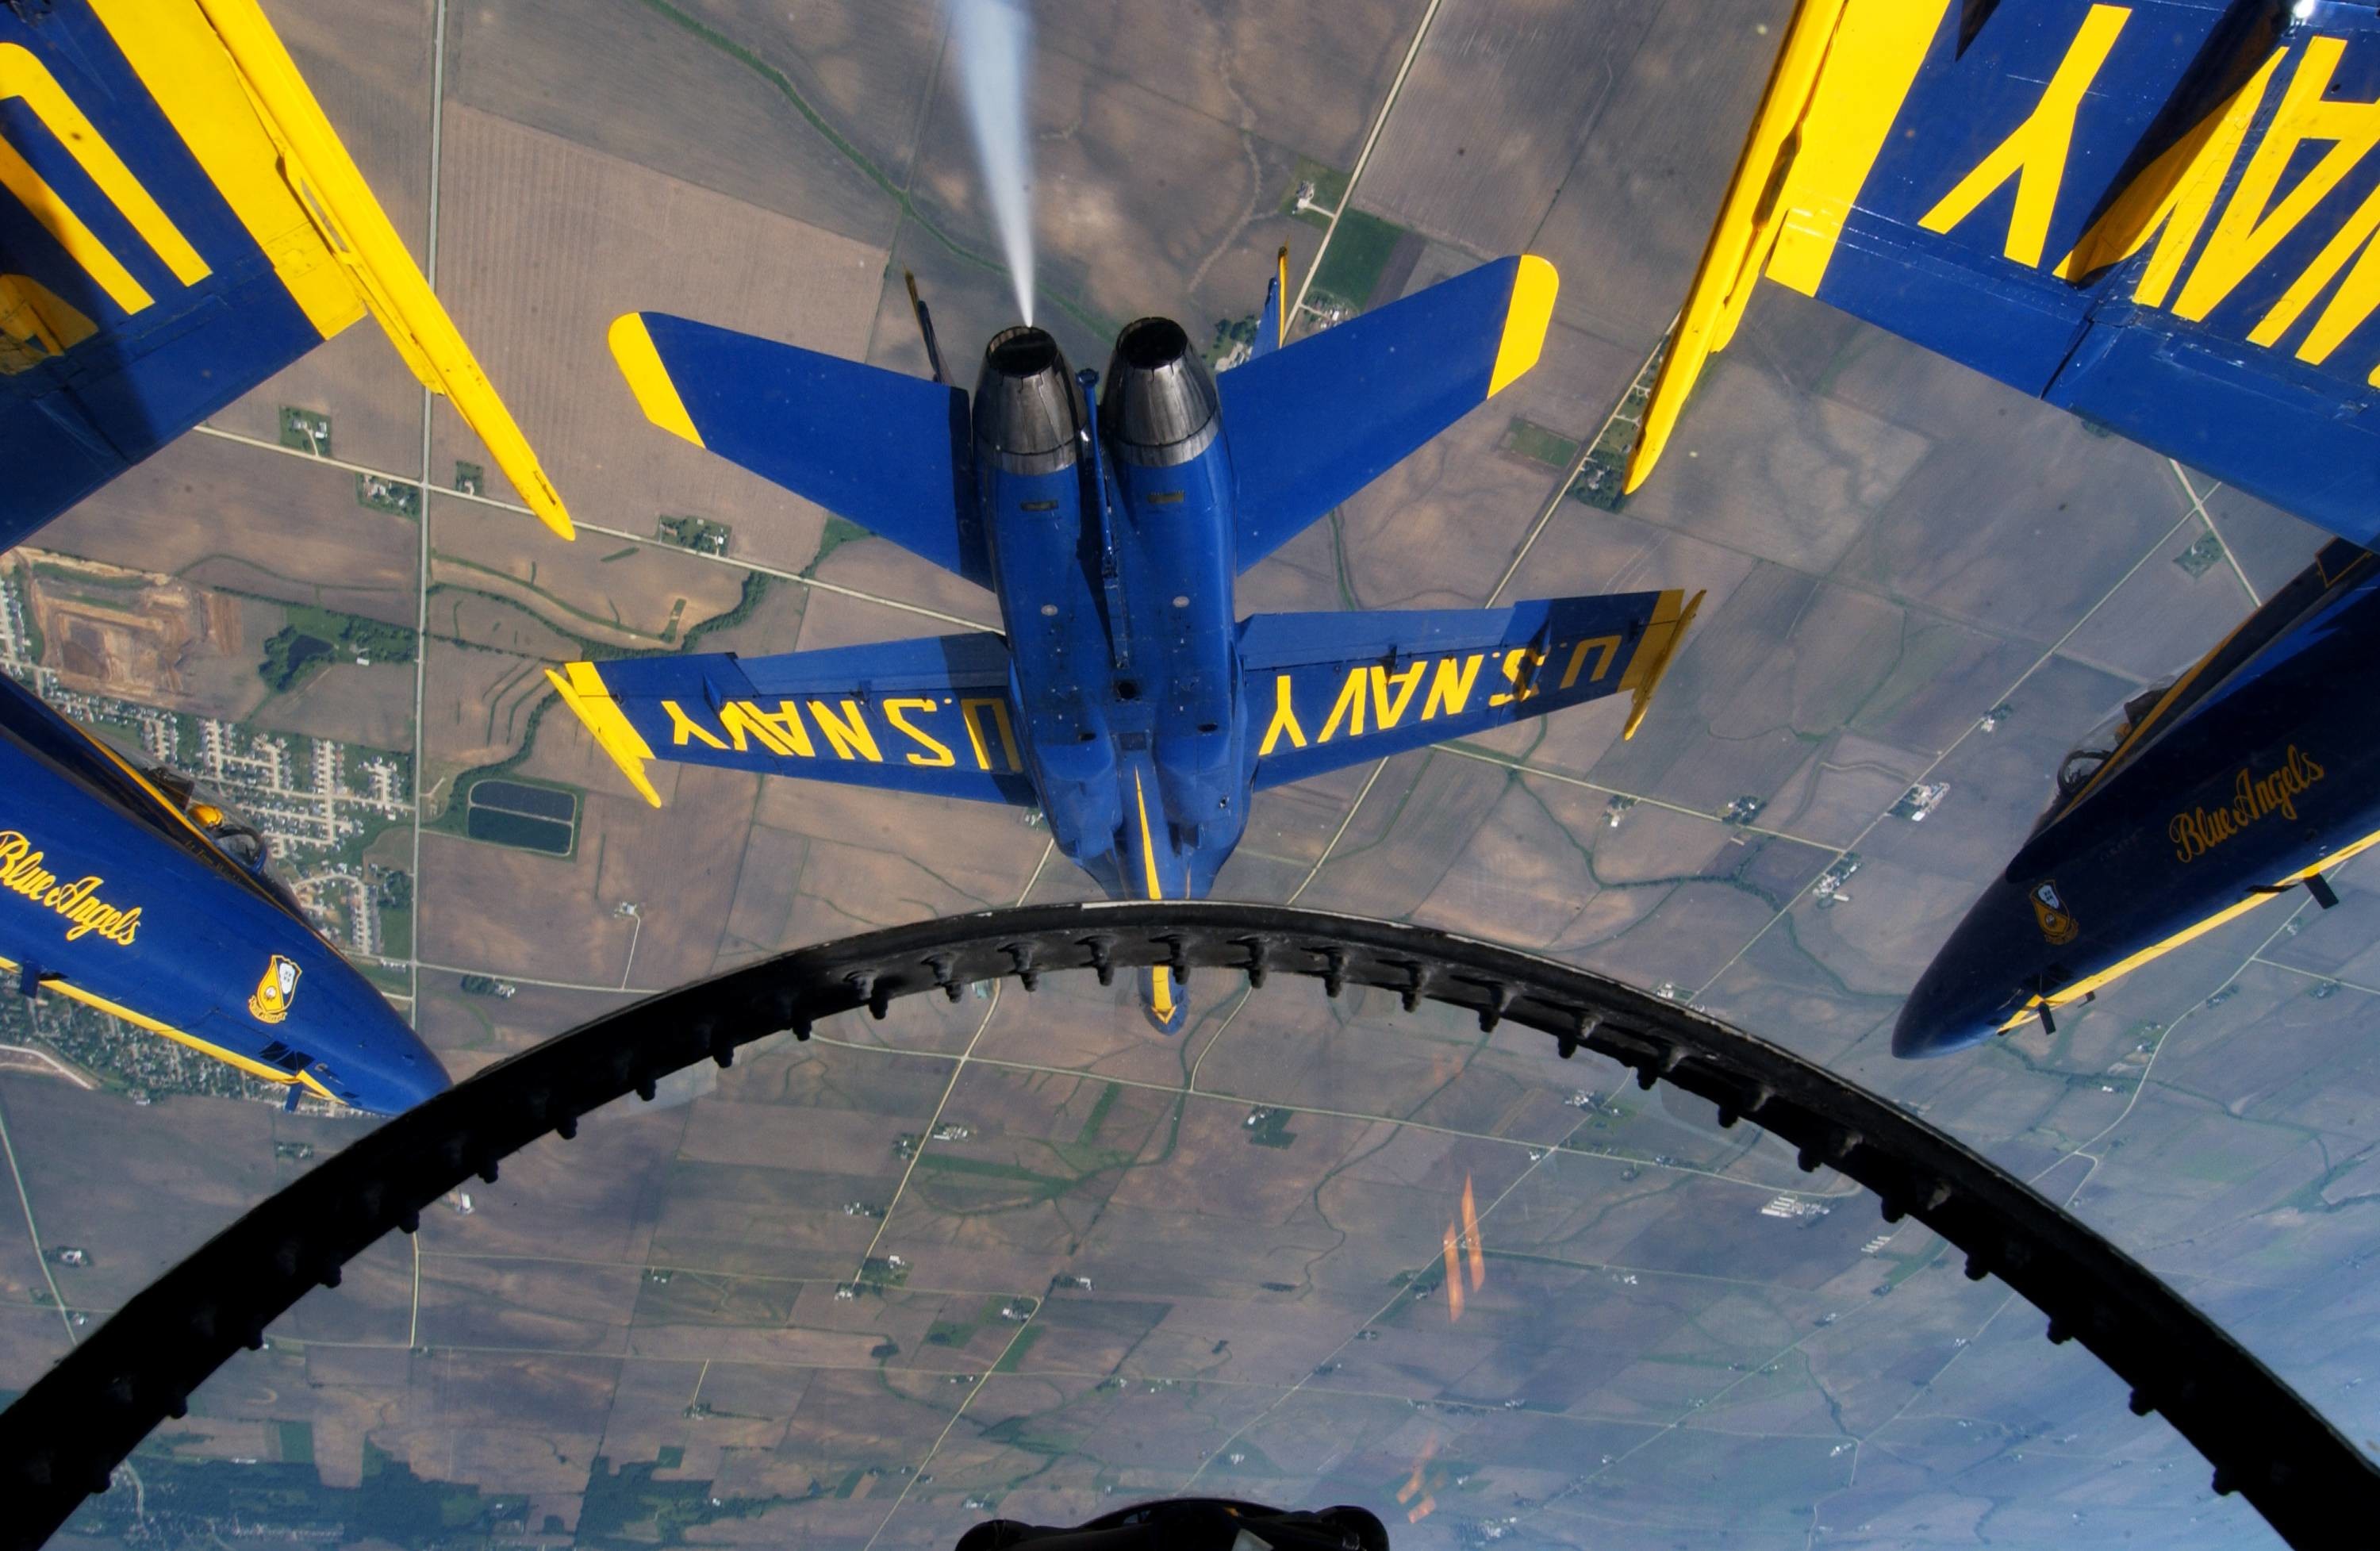 3000x1955 Blue Angels slated for Cherry Point air show, May 21-23 > Marine .